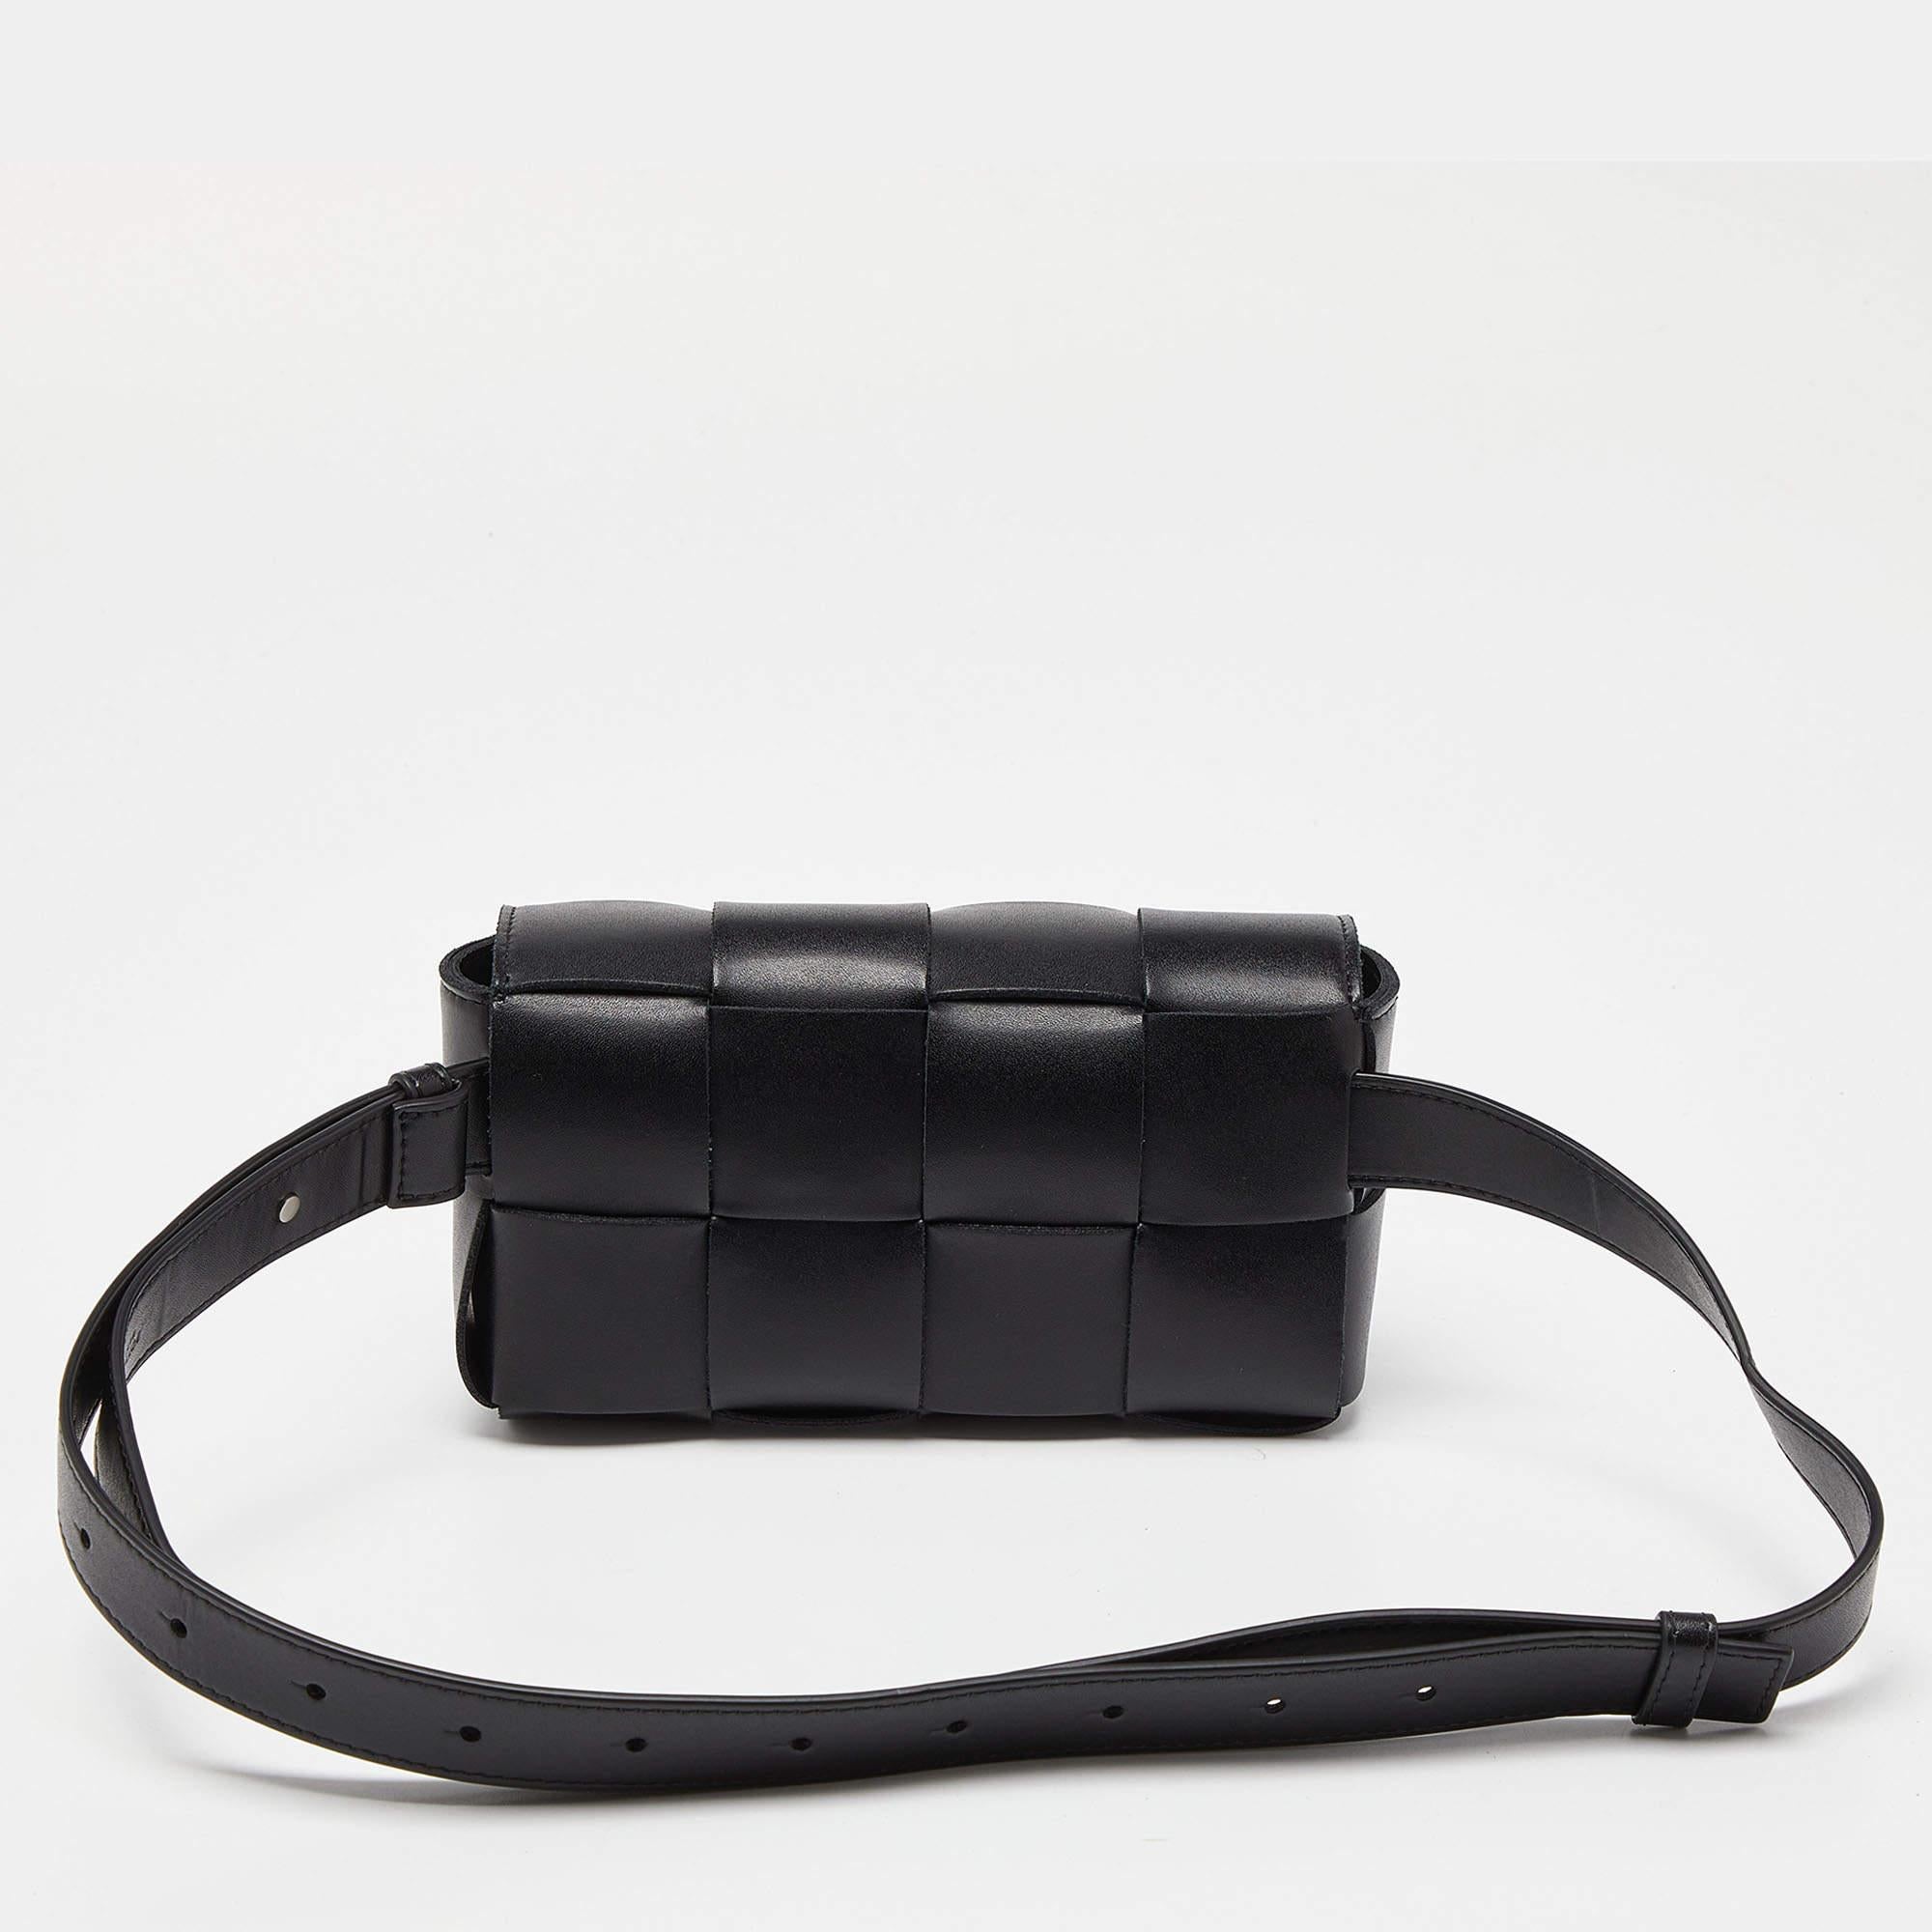 Crafted from exquisite leather in the brand's signature intrecciato weave, this mini Cassette belt bag from Bottega Veneta features an adjustable belt strap for hands-free wear. It's the perfect blend of functionality and elegance, making it an